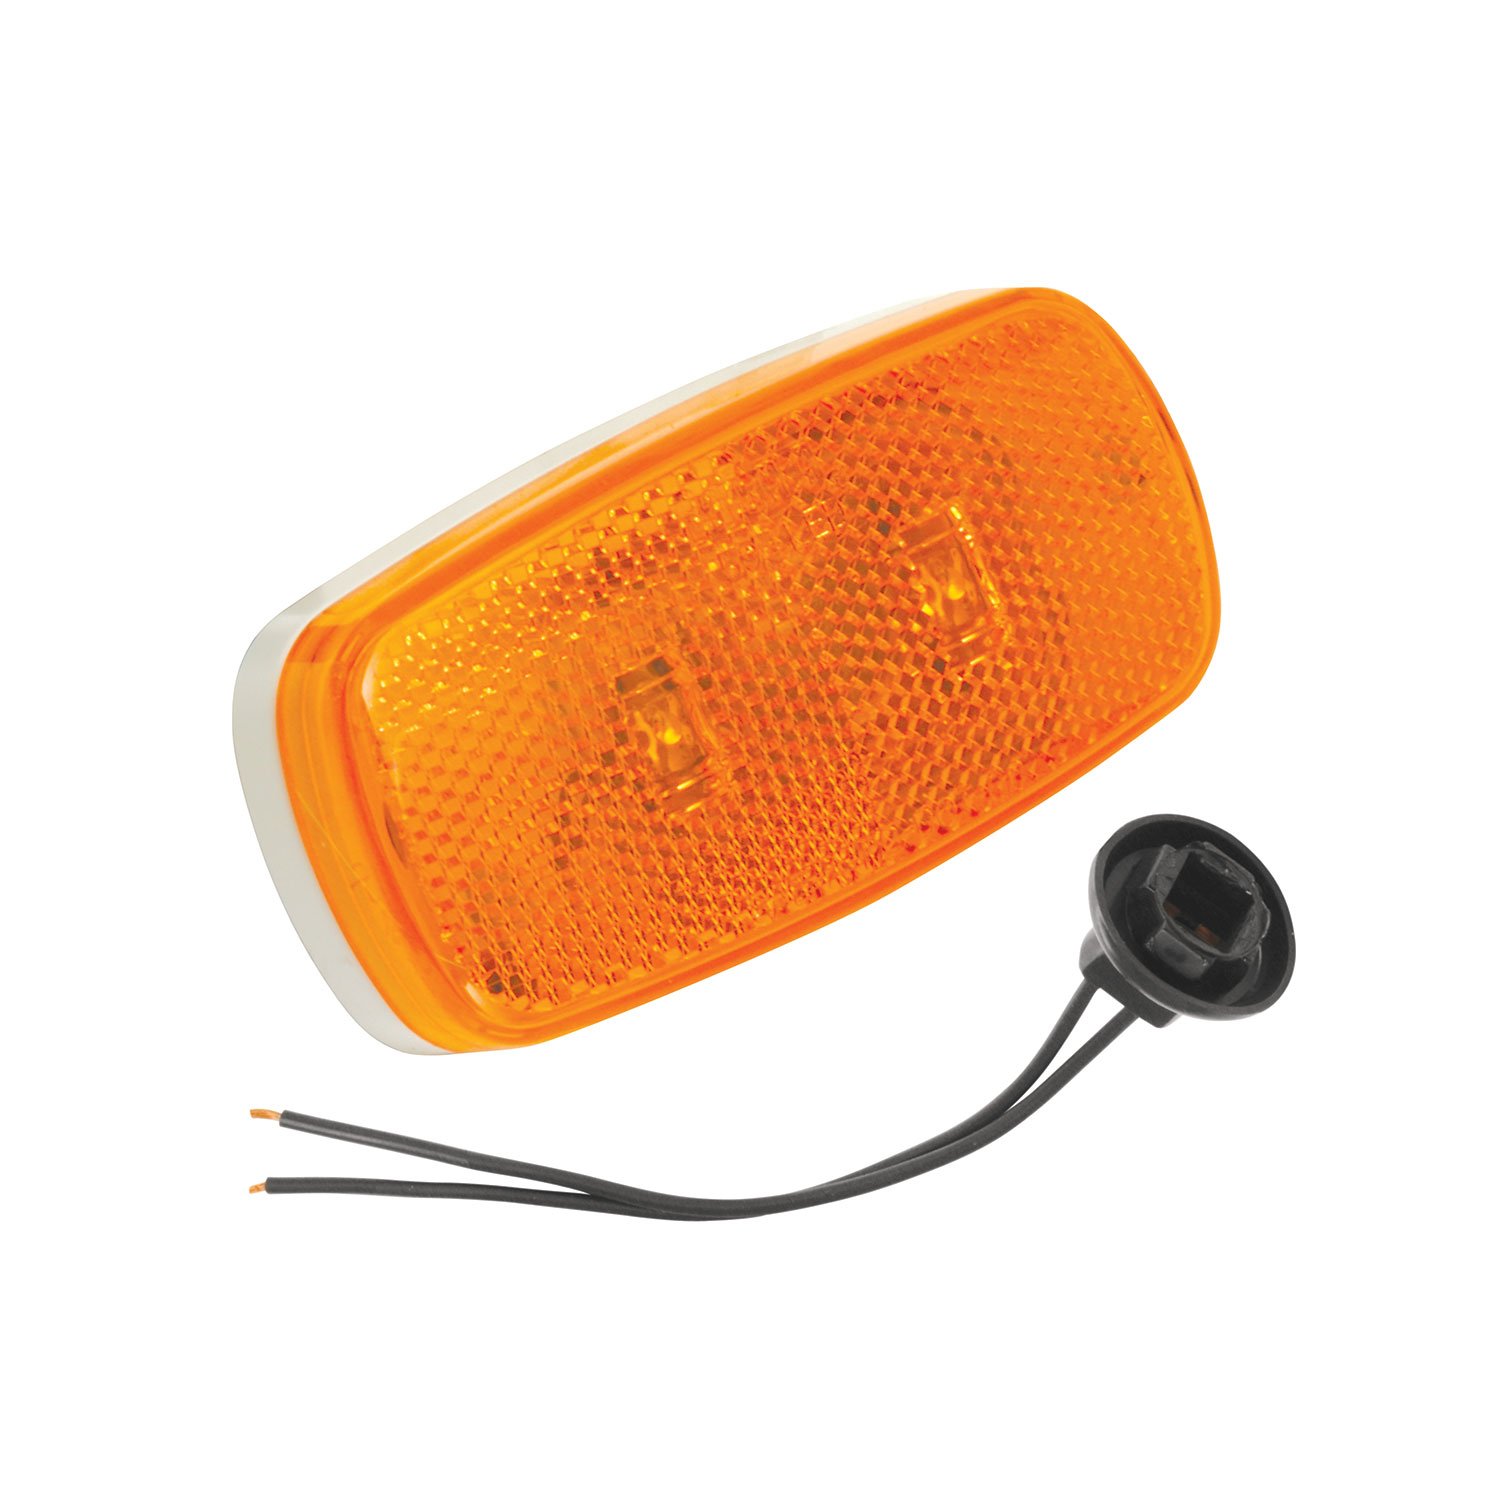 Bargman 42-59-402 Amber LED Clearance Light with White Base